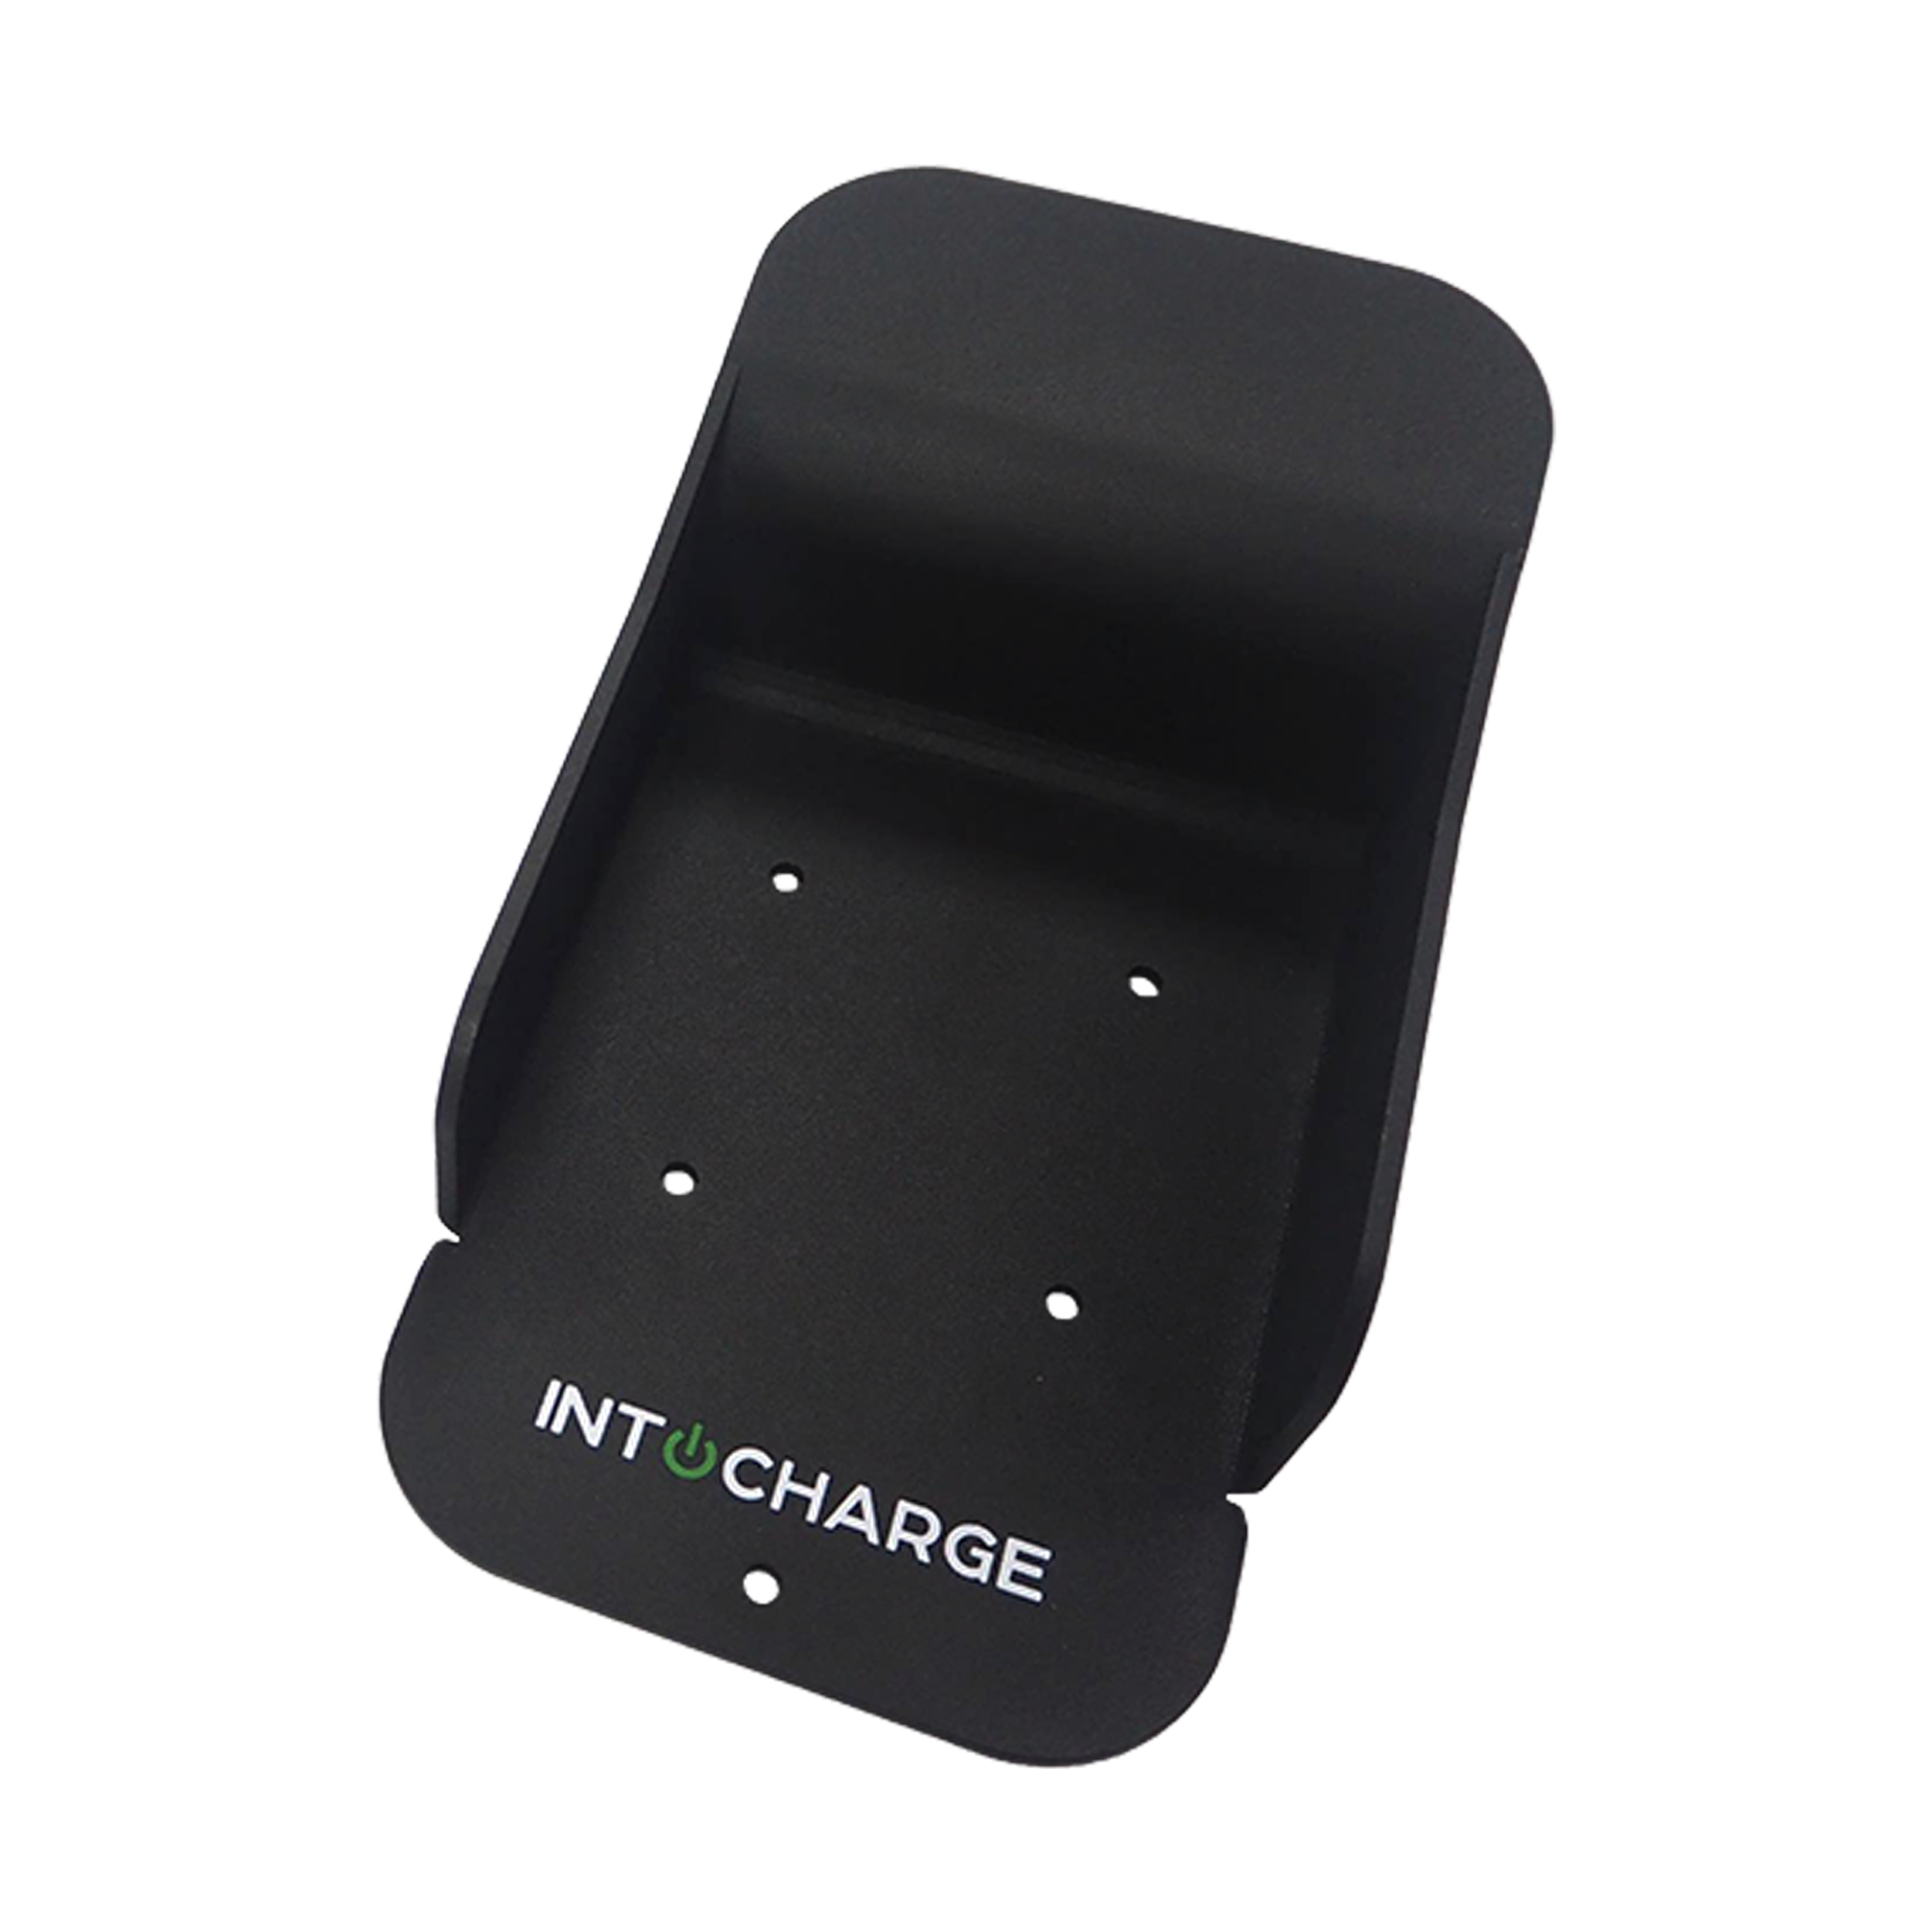 IntoCharge SAE J1772 Charger Holster Dock and Cable Holder